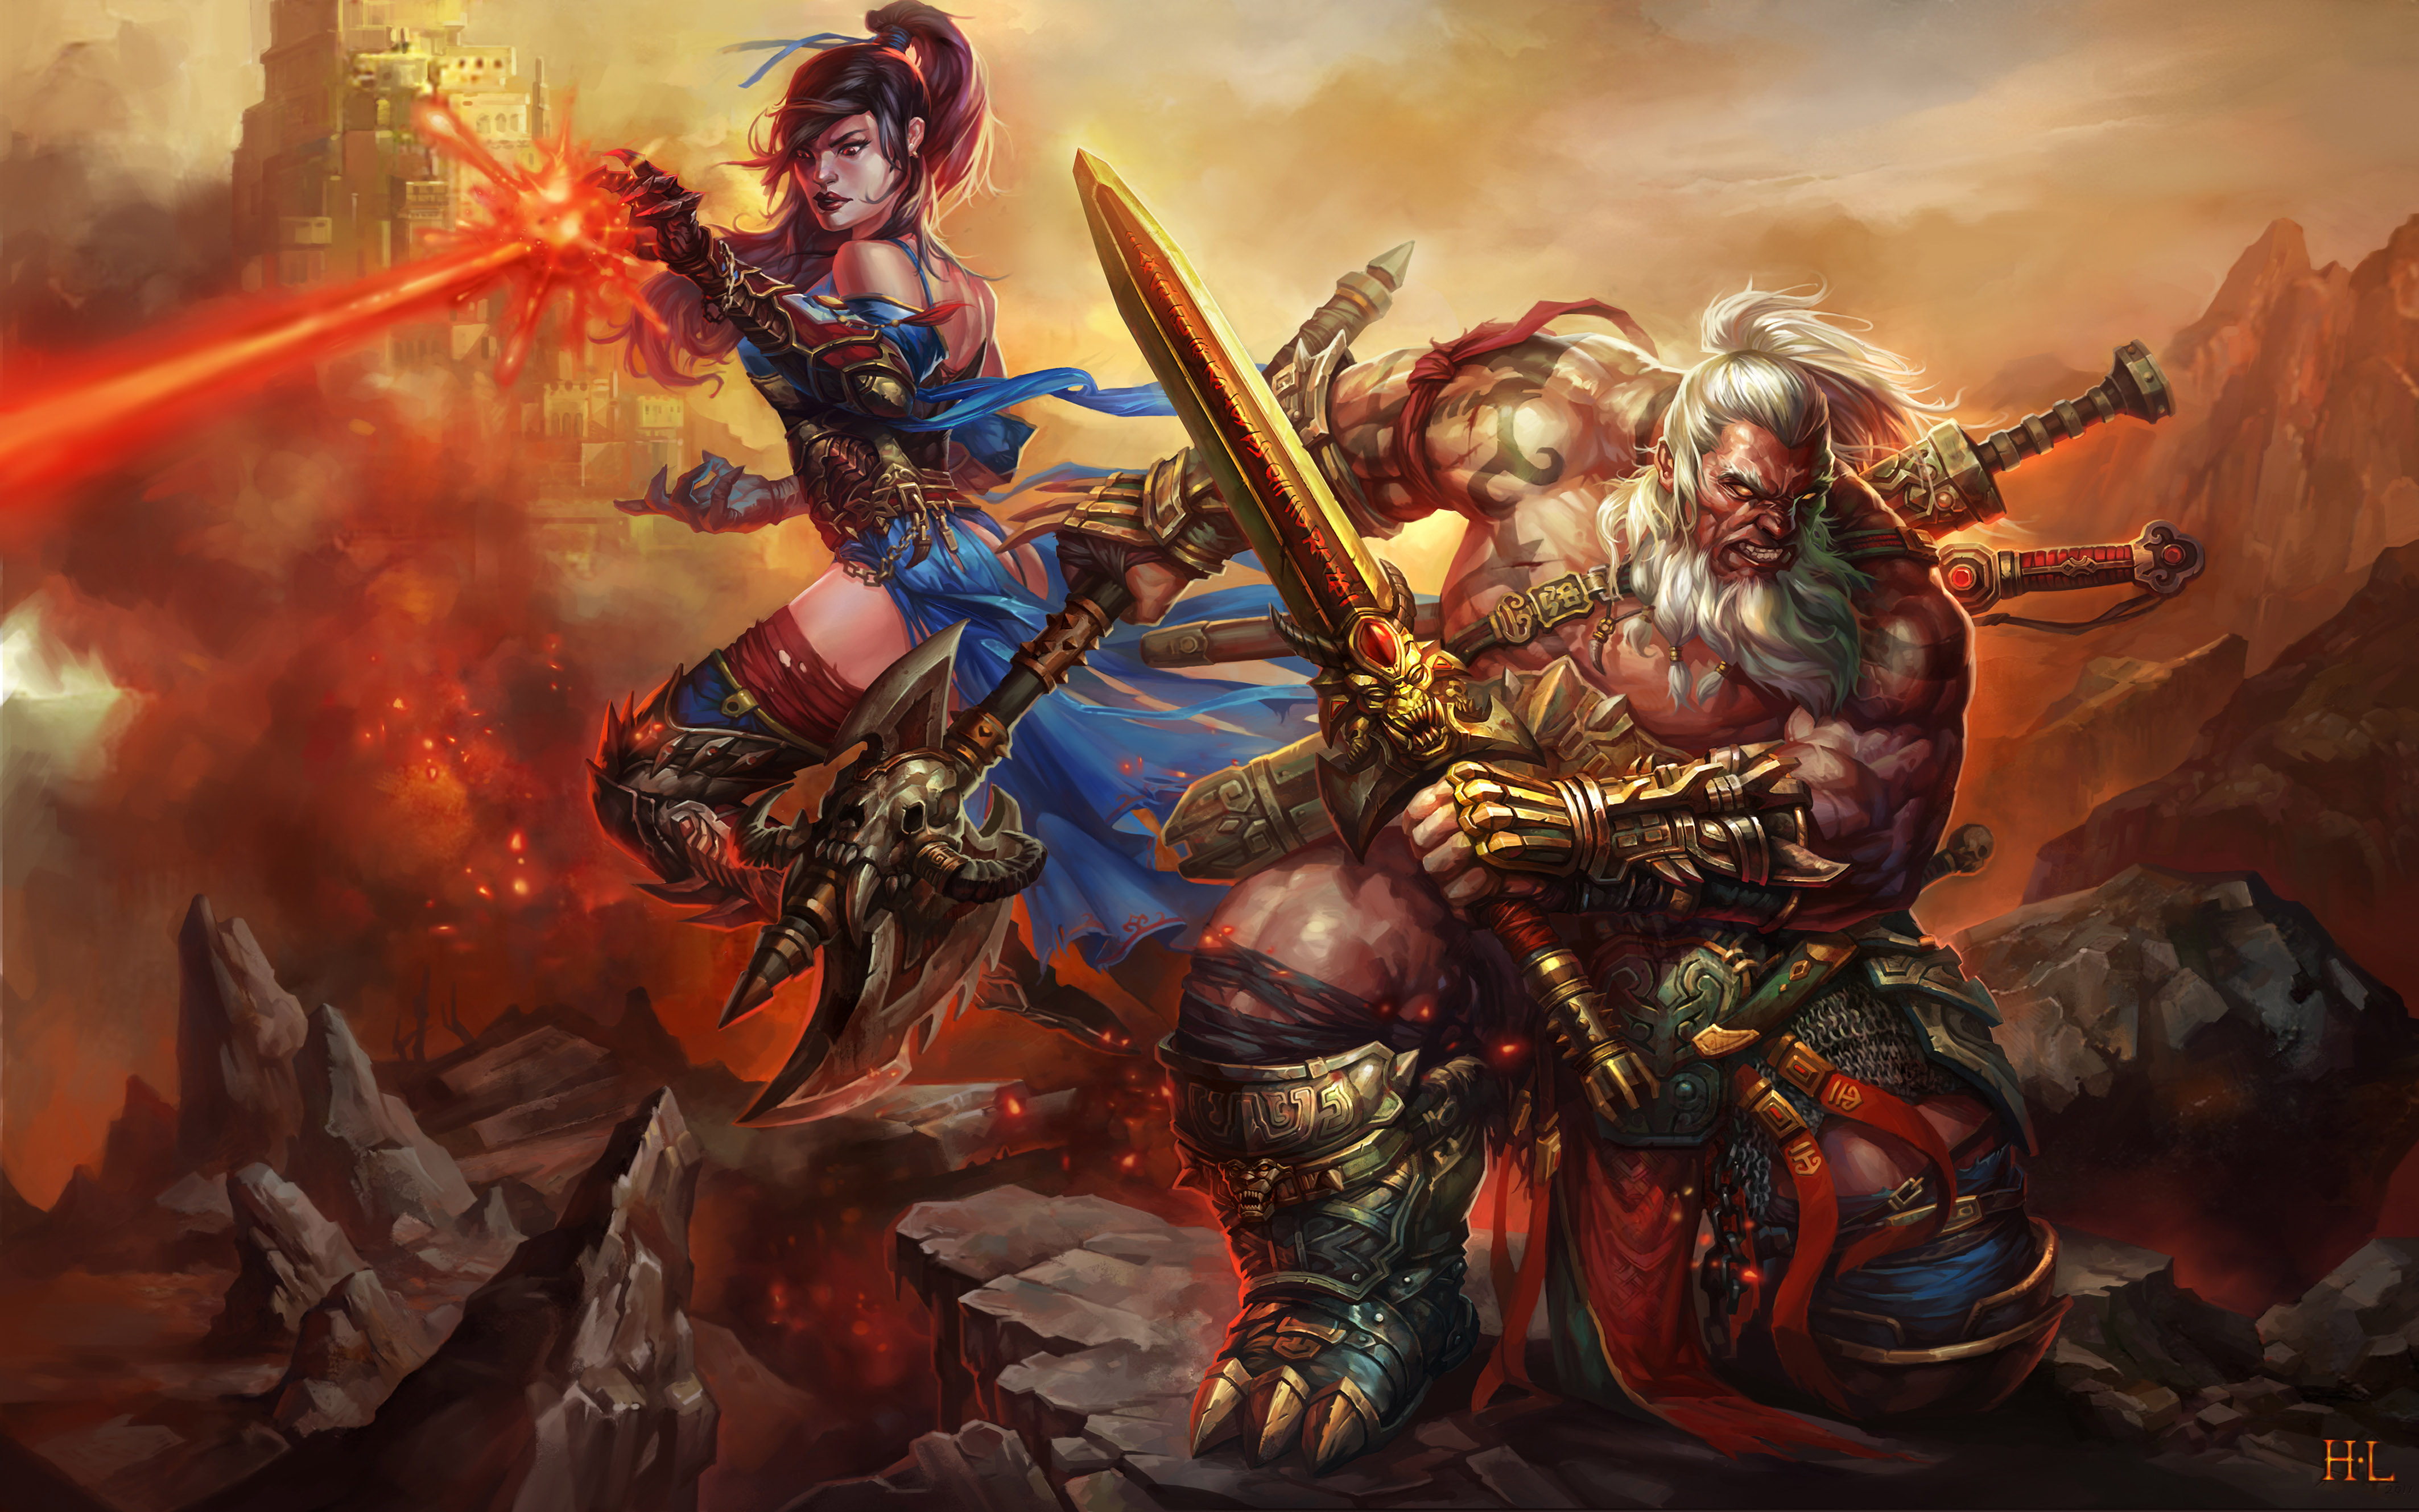 Diablo Iii Characters From Video Game Barbarian And Witch Doctor Fan Art Wallpaper Hd 4252x2658 Wallpapers13 Com